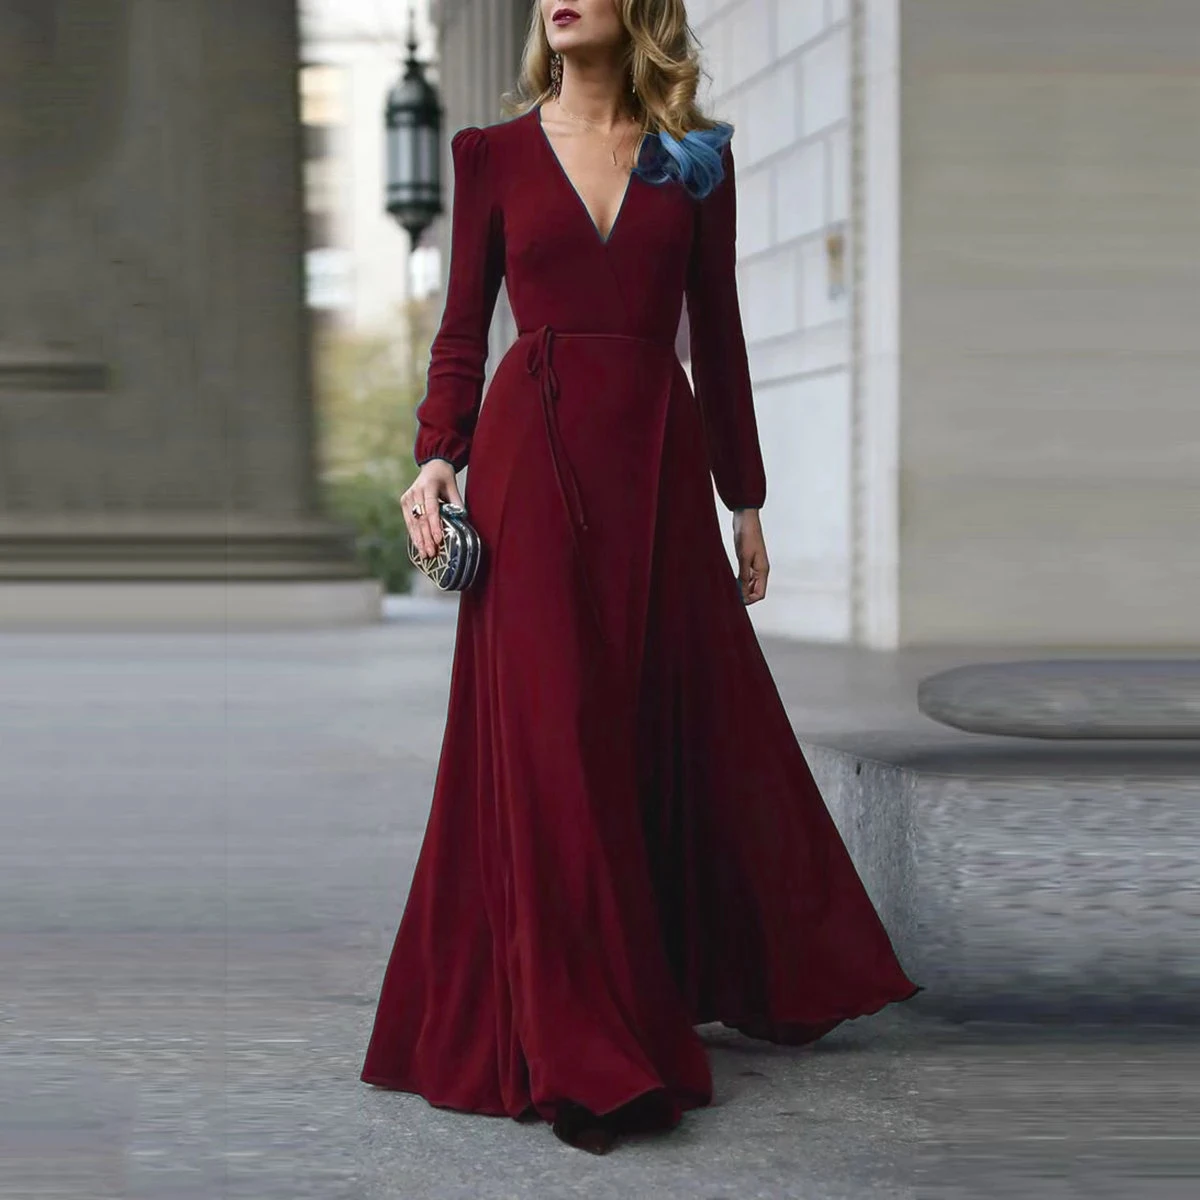 Women Sexy Formal Maxi Dress V Neck Long Sleeve Solid color Bandage Office Ladies Evening Party Prom Gown blazer dress